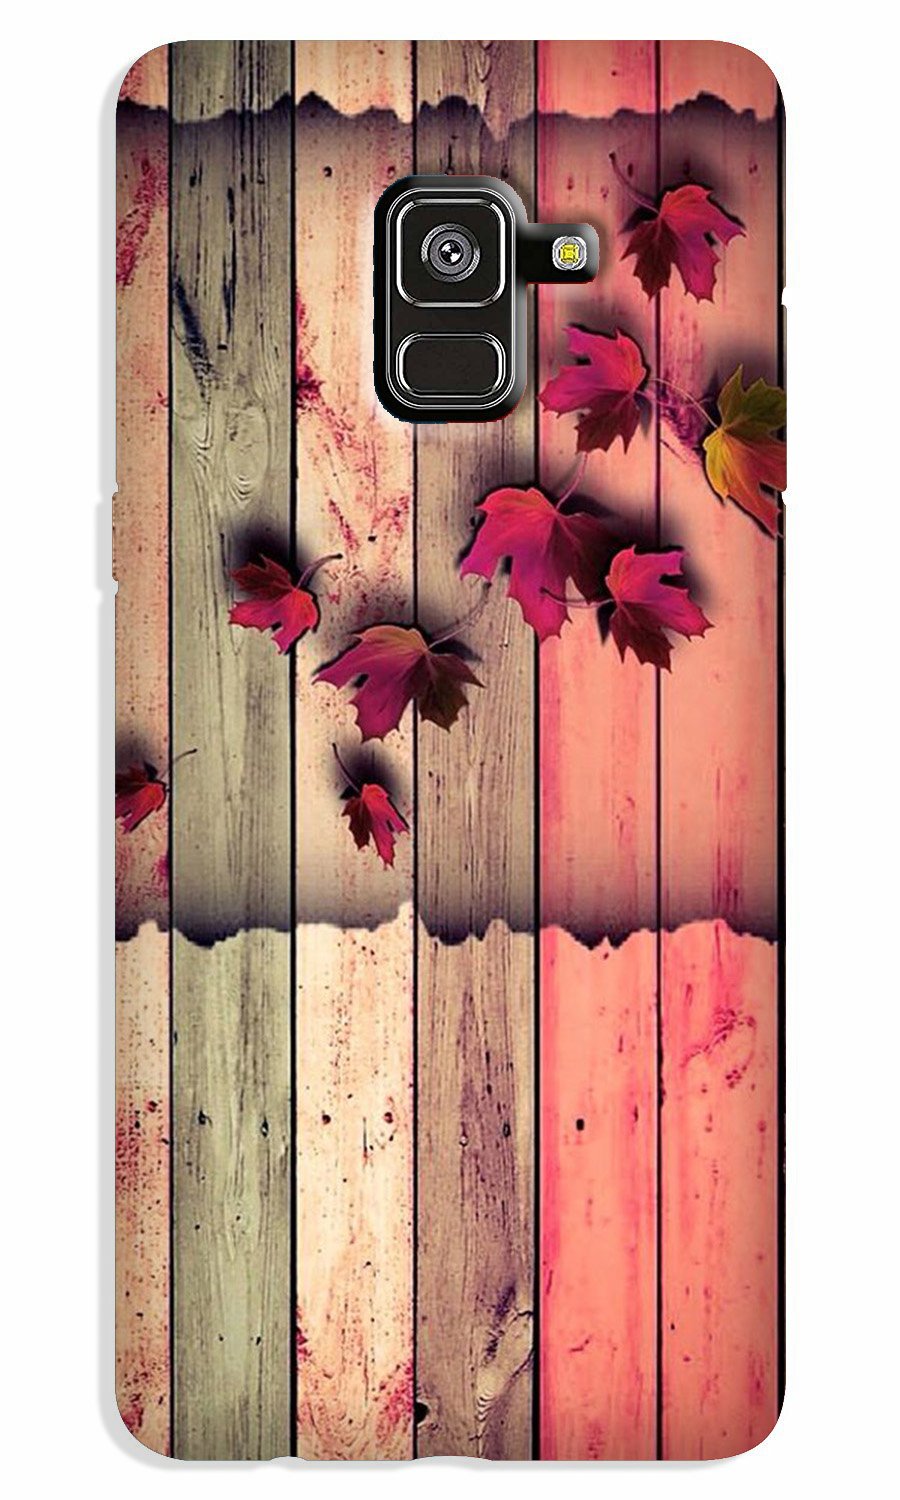 Wooden look2 Case for Galaxy J6 / On6